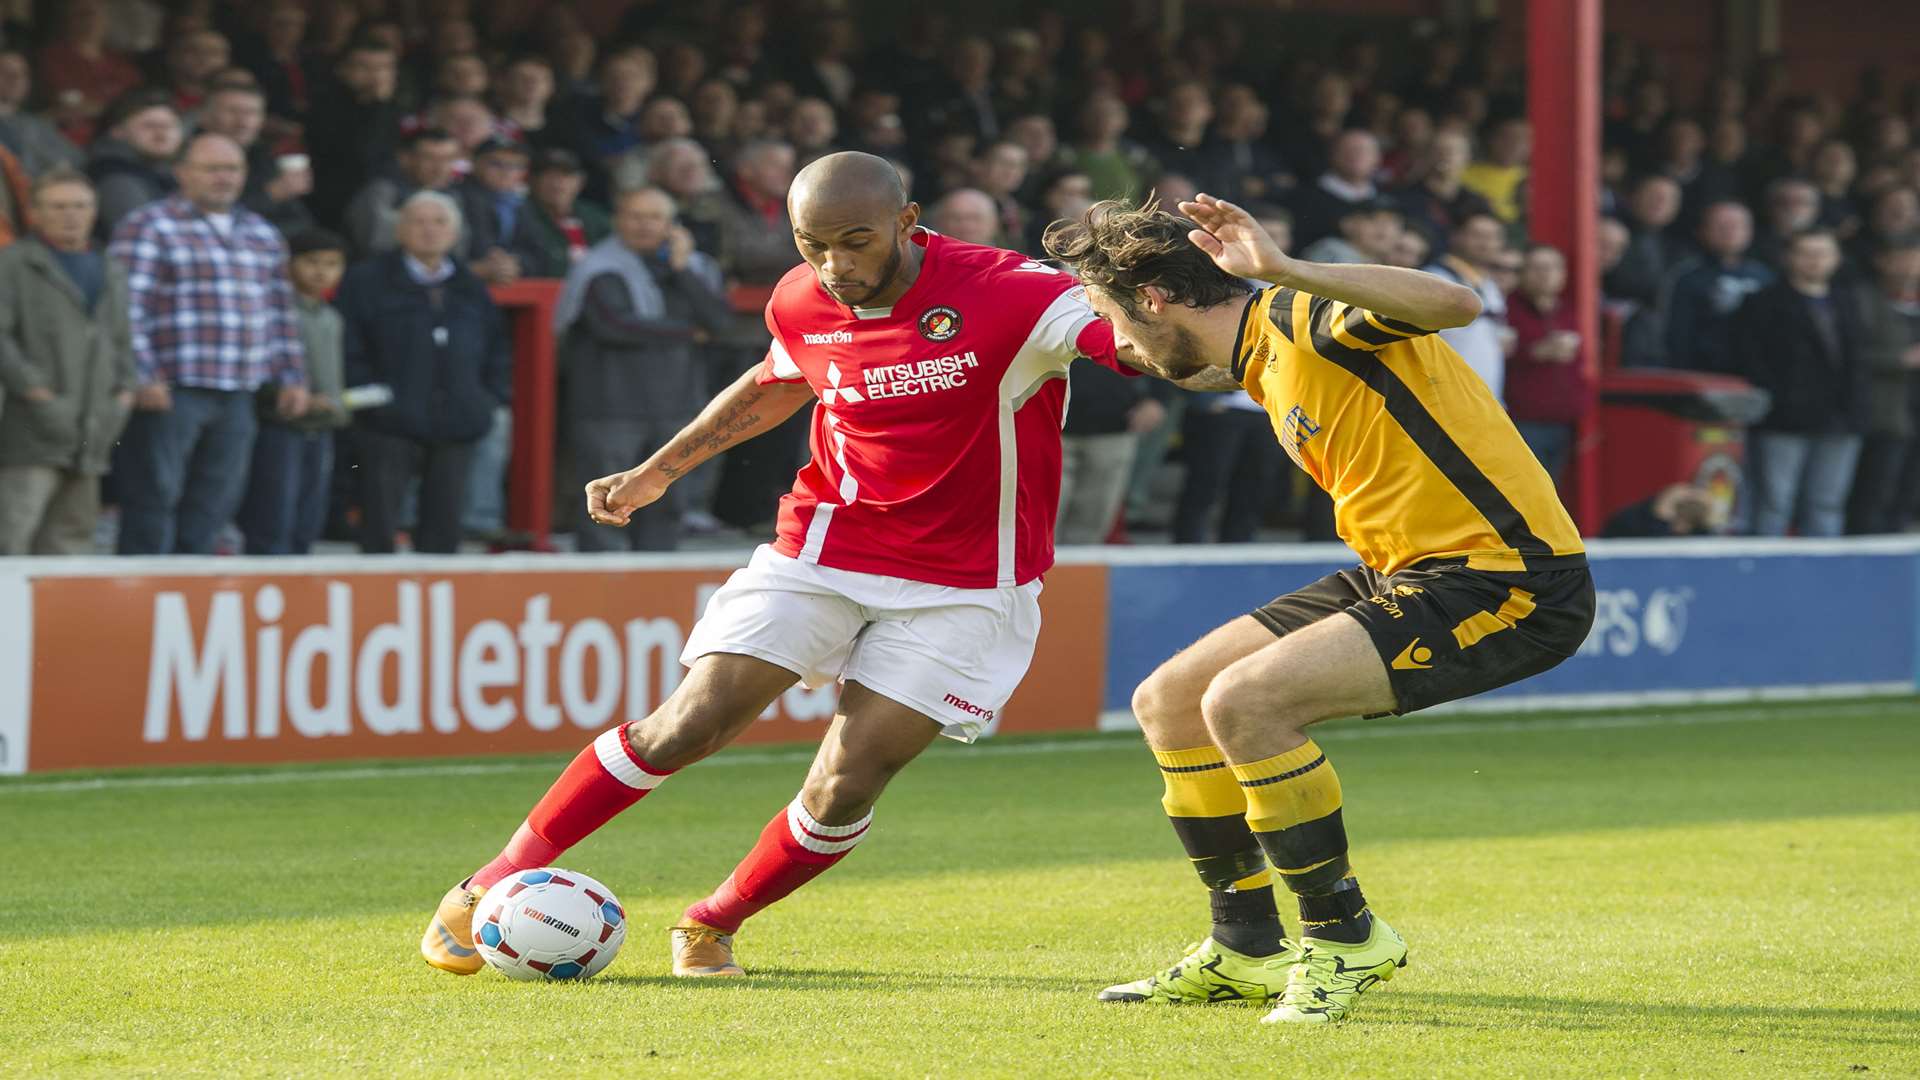 Danny Haynes takes on Maidstone full-back Tom Mills Picture: Andy Payton